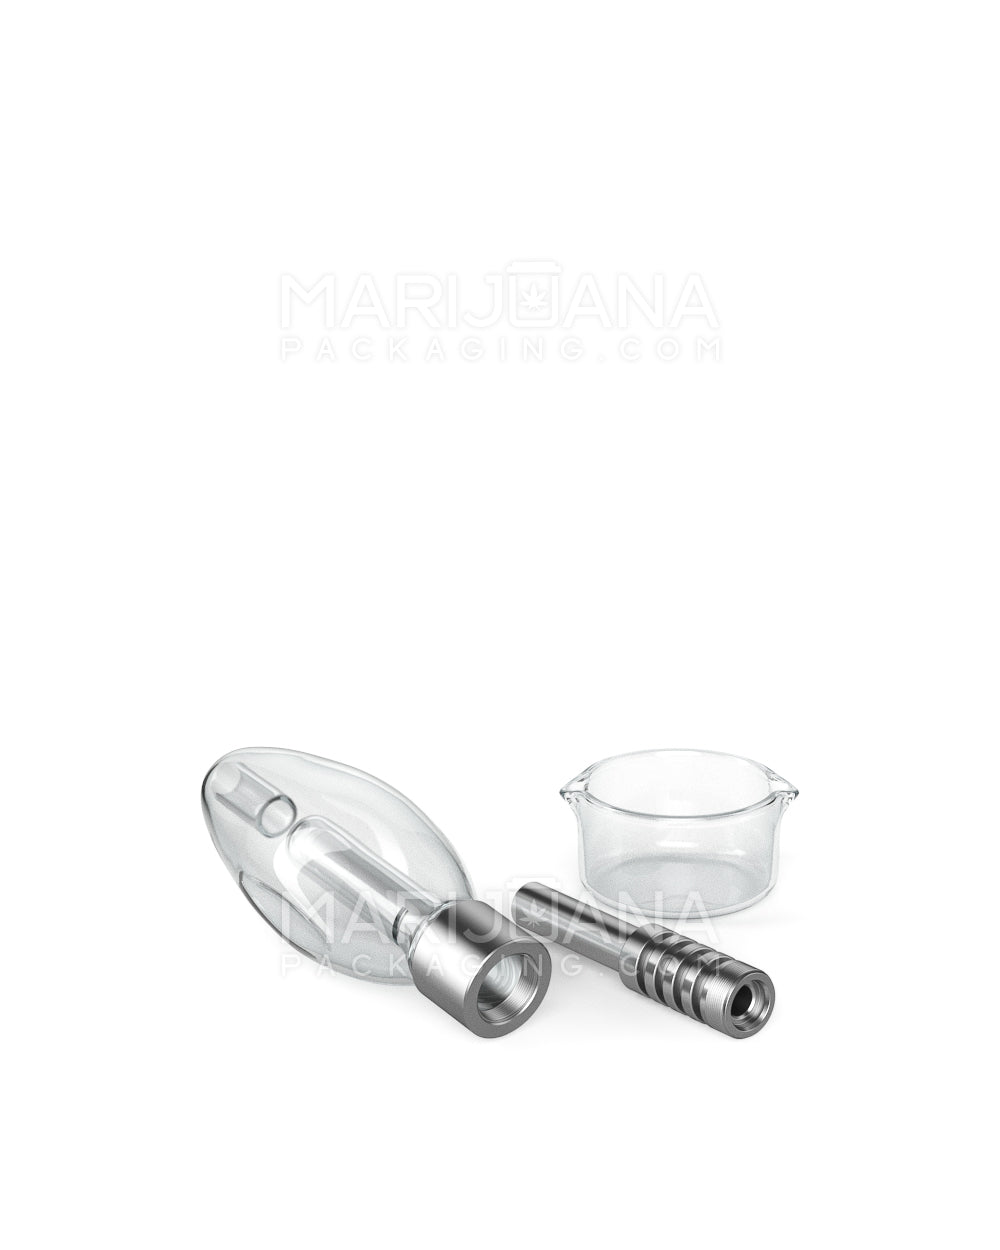 Nectar Collector Dab Pipe w/ Titanium Tip | 5.5in Long - 14mm Attachment - Clear - 6